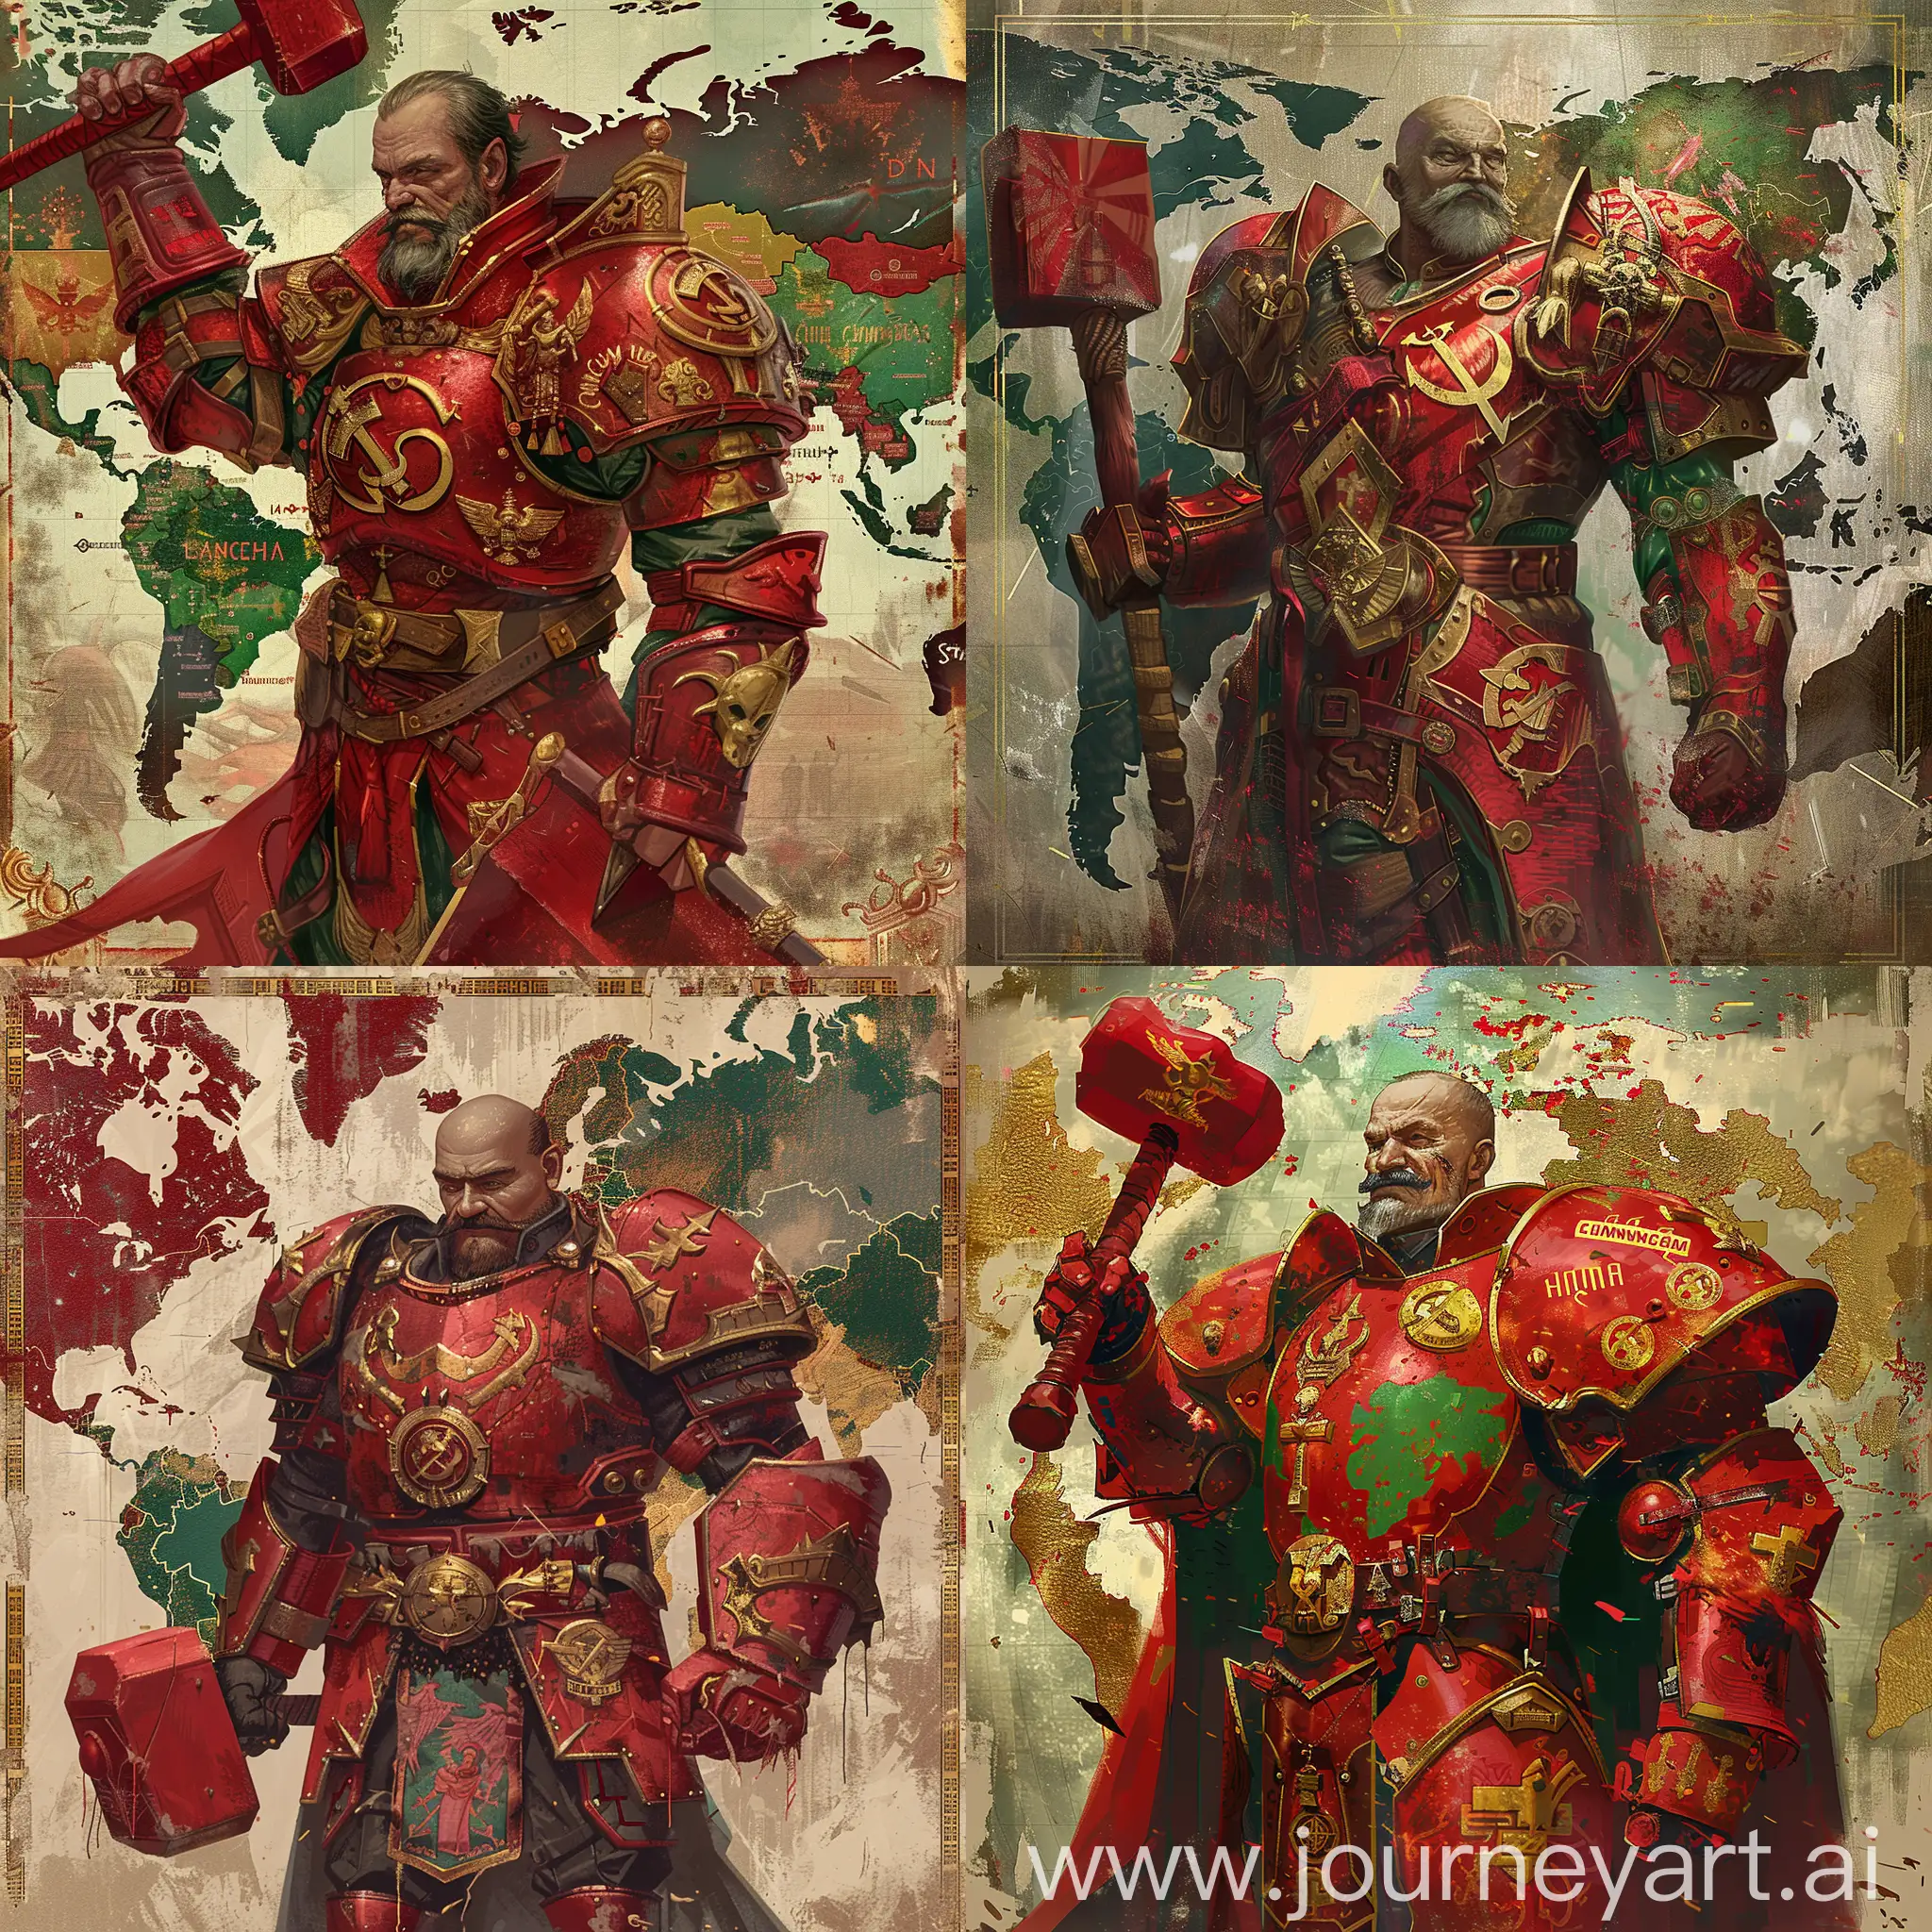 a dnd digital painting with vladimir lenin as a paladin with a red knight armour with communism signs in the details, carrying a big red hammer, the world map in the background with details in gold, red and green